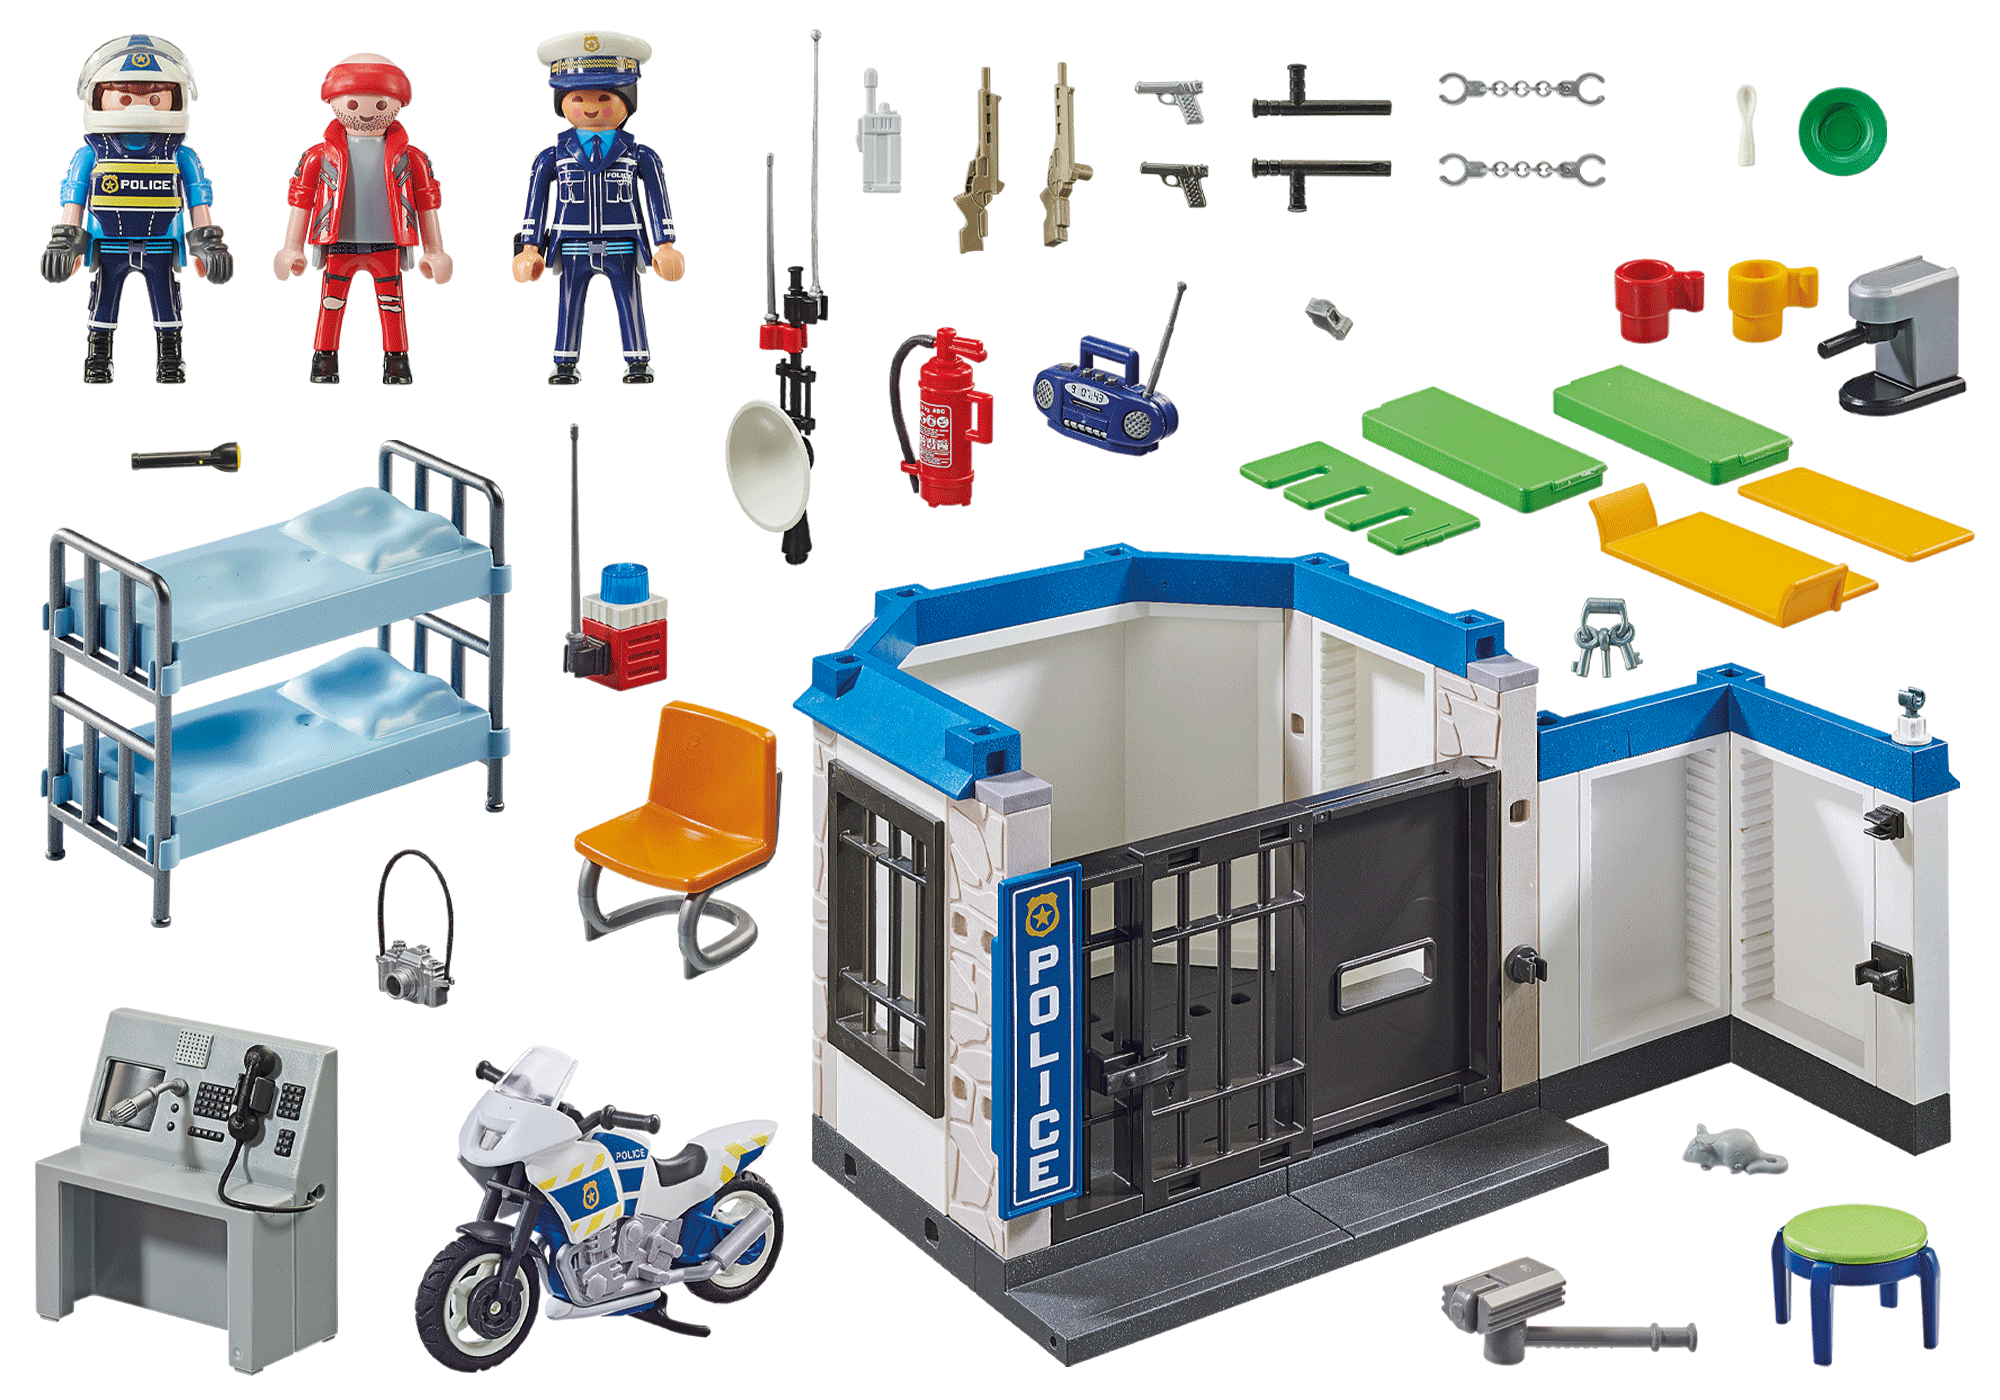 PLAYMOBIL 70568 - City Action - Police: Escape from Prison - Playpolis